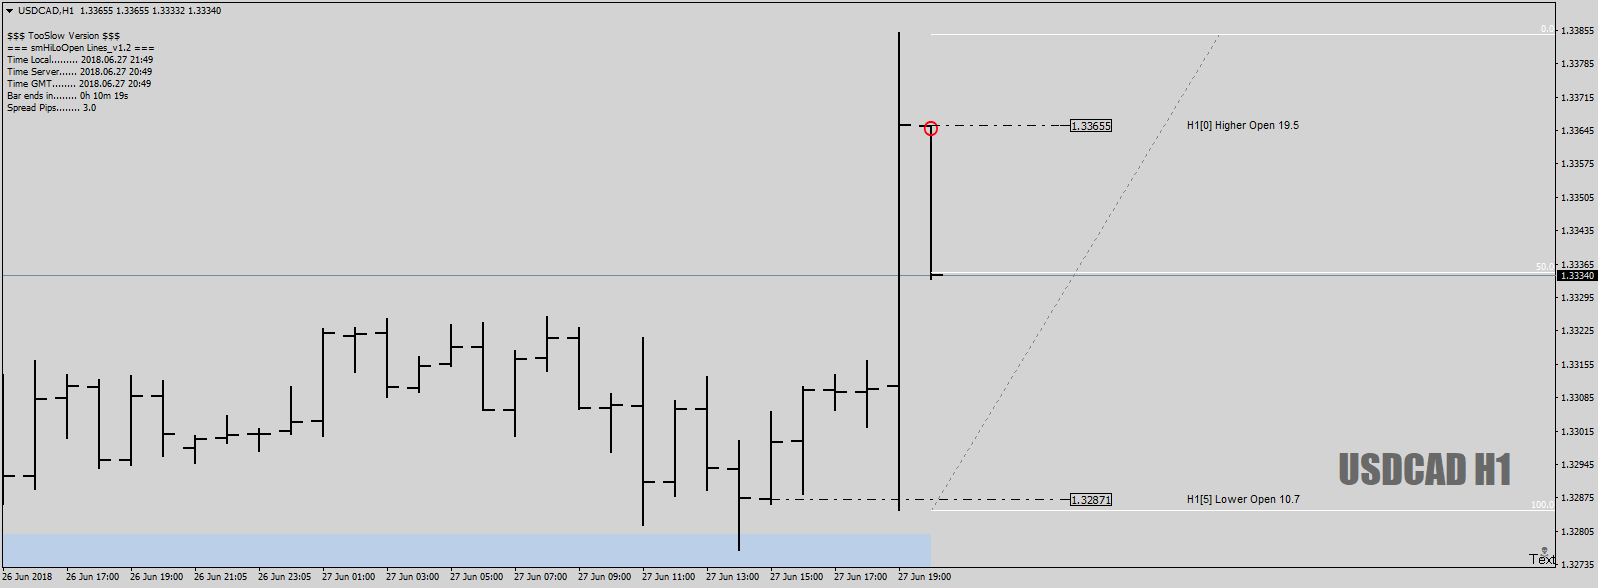 USDCADH1atthe50June27th18.png